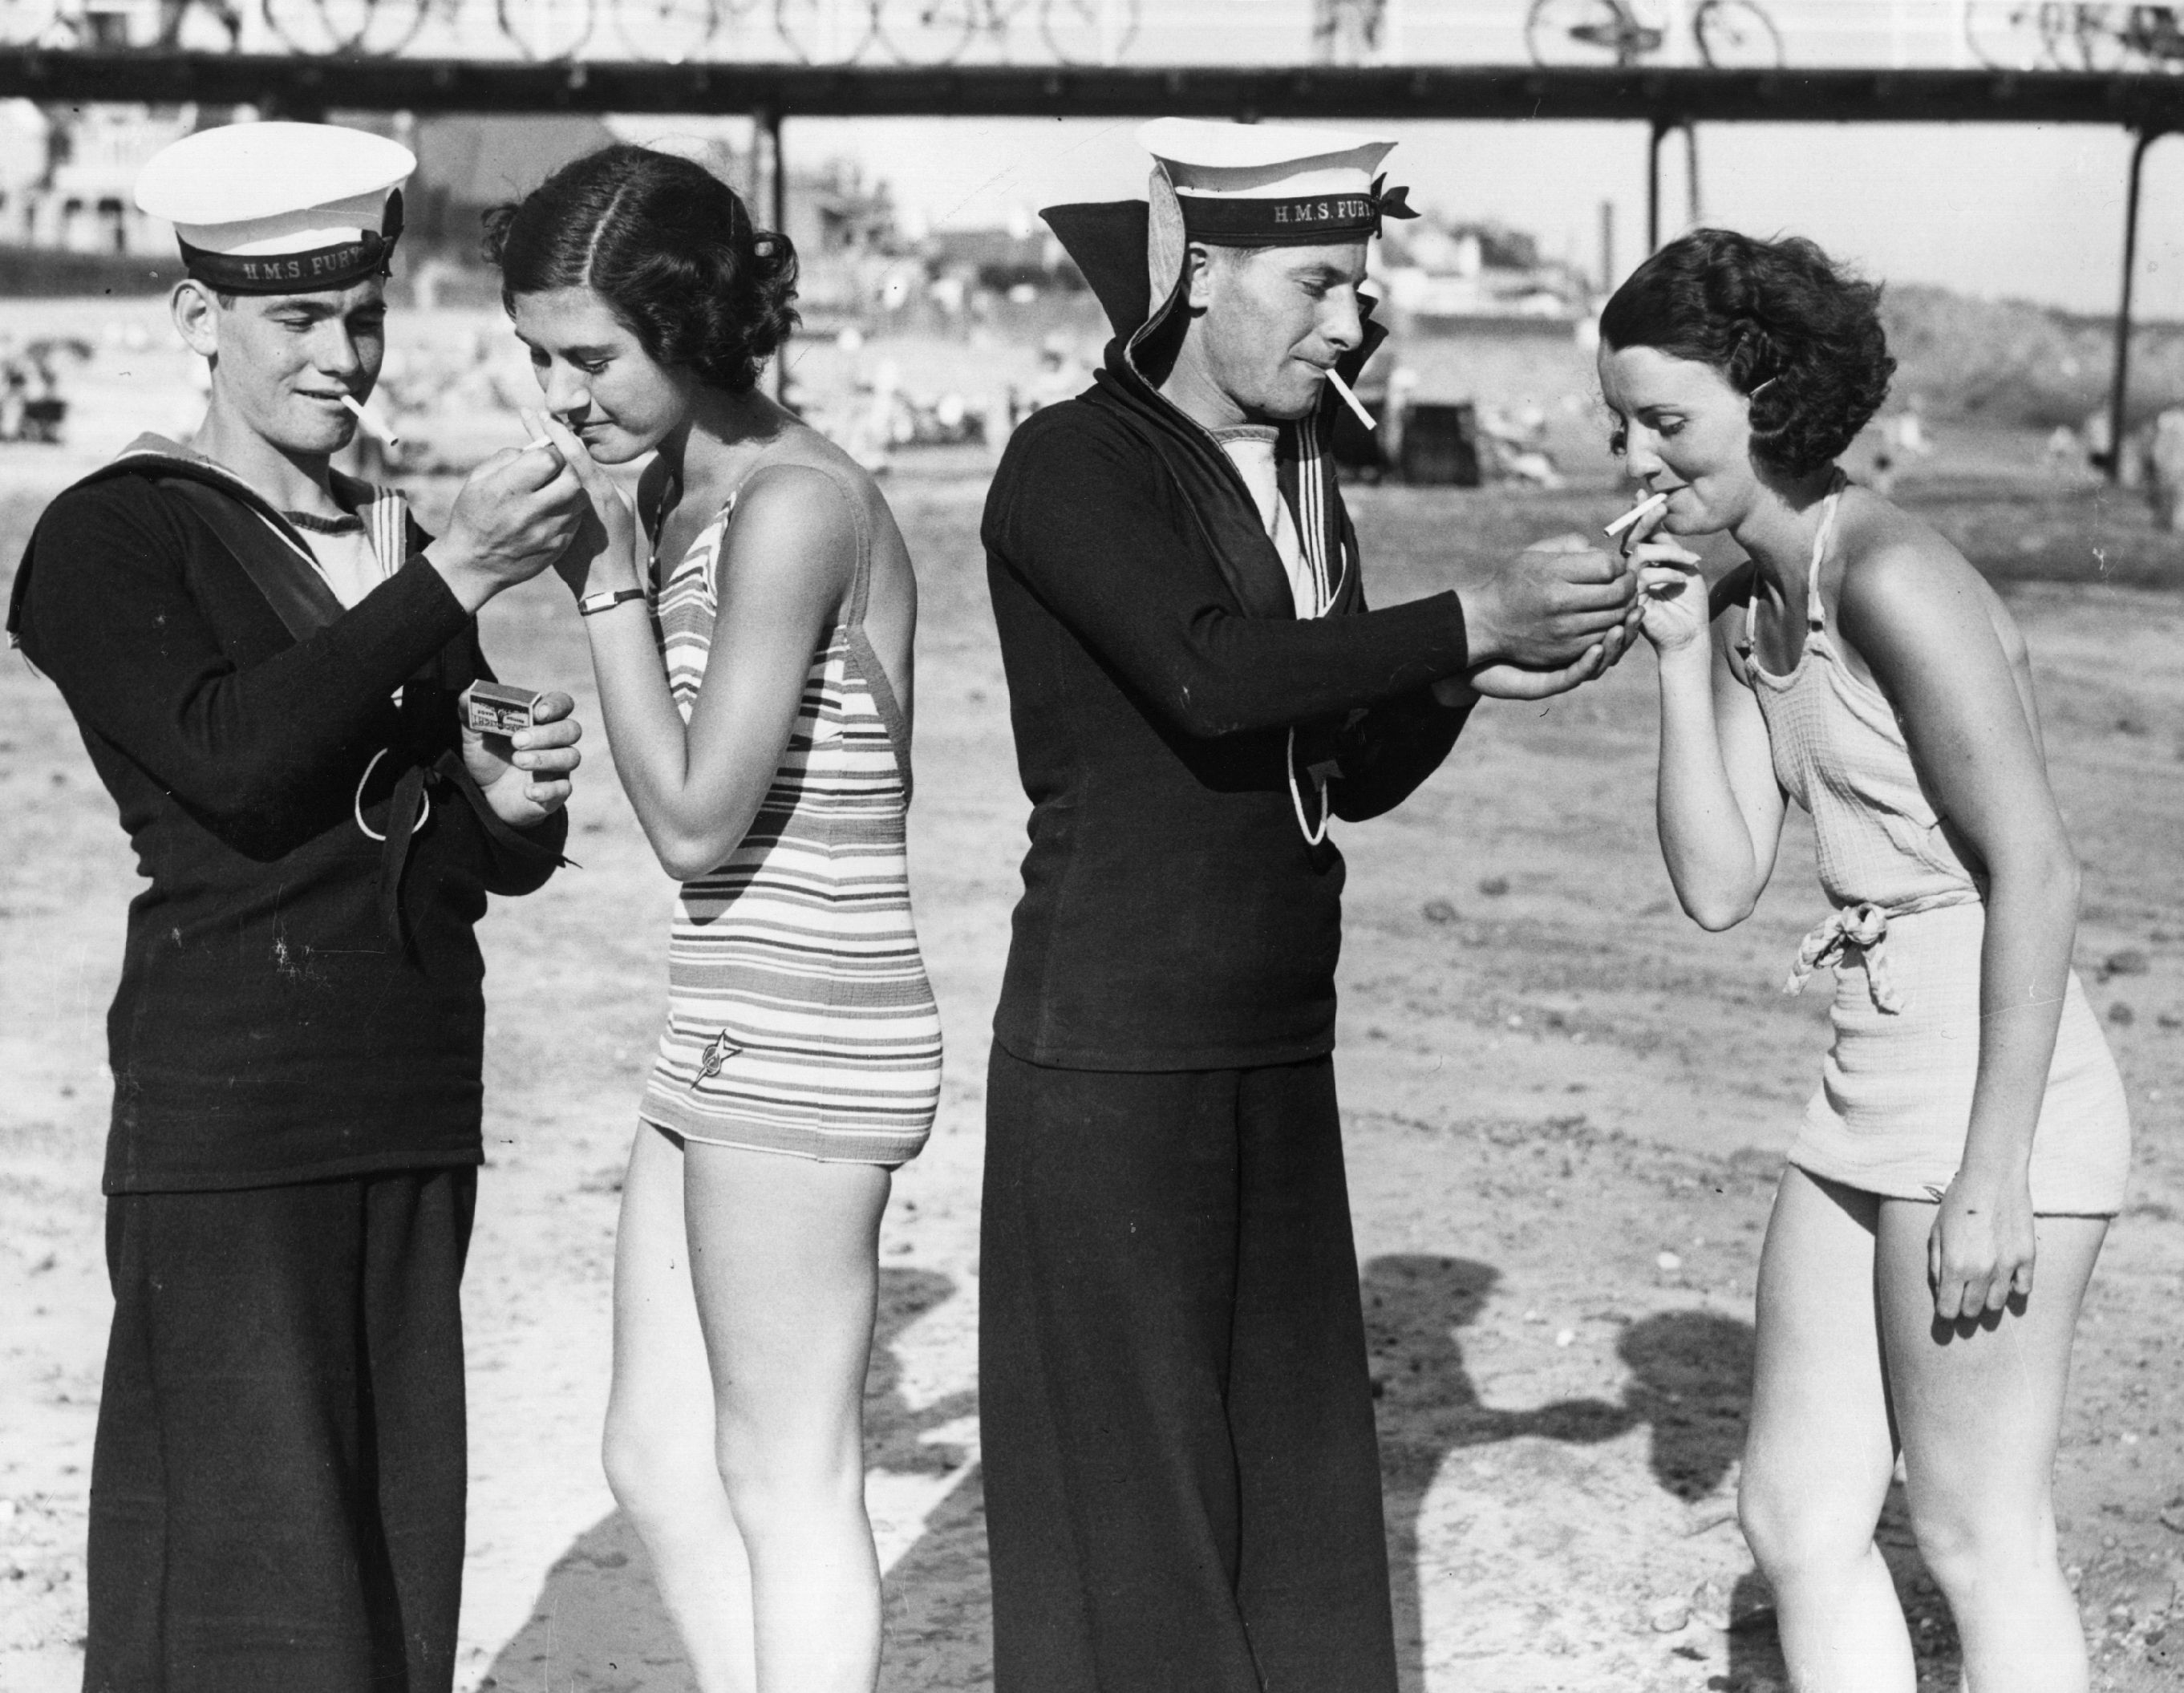 Two sailors from HMS Fury enjoy a smoke with two women in bathing suits on a beach in Jersey (Photo by William Vanderson), 29th June 1935.jpg